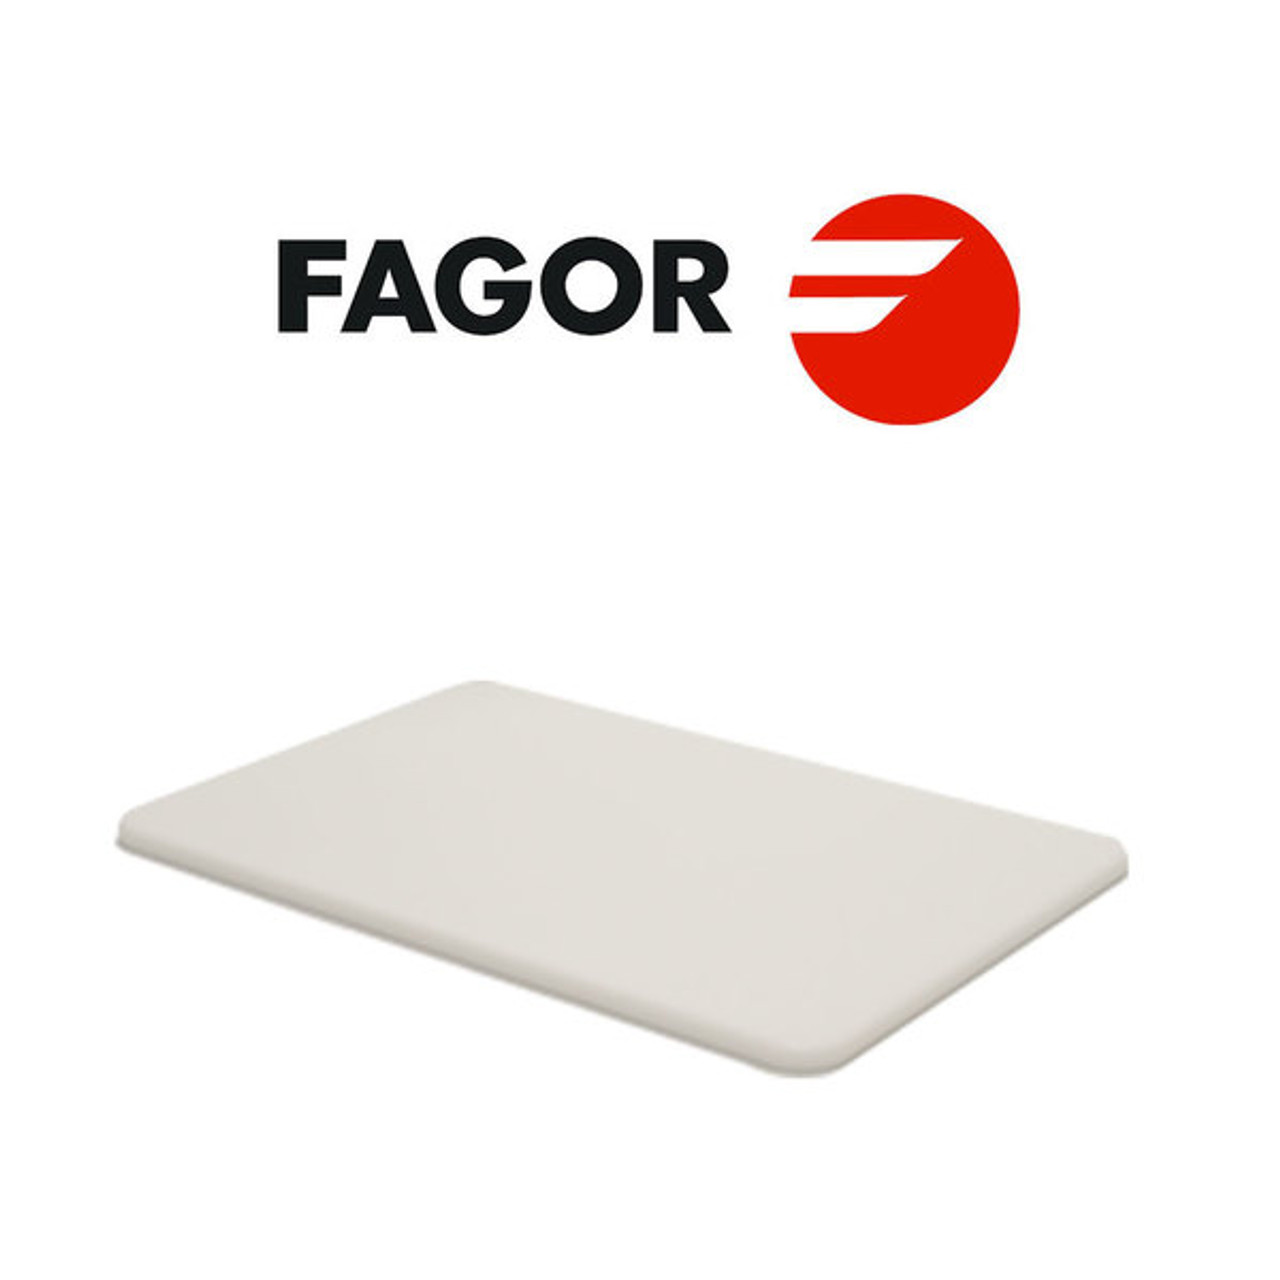 OEM Cutting Board - Fagor Commercial - P#: 600305M0010